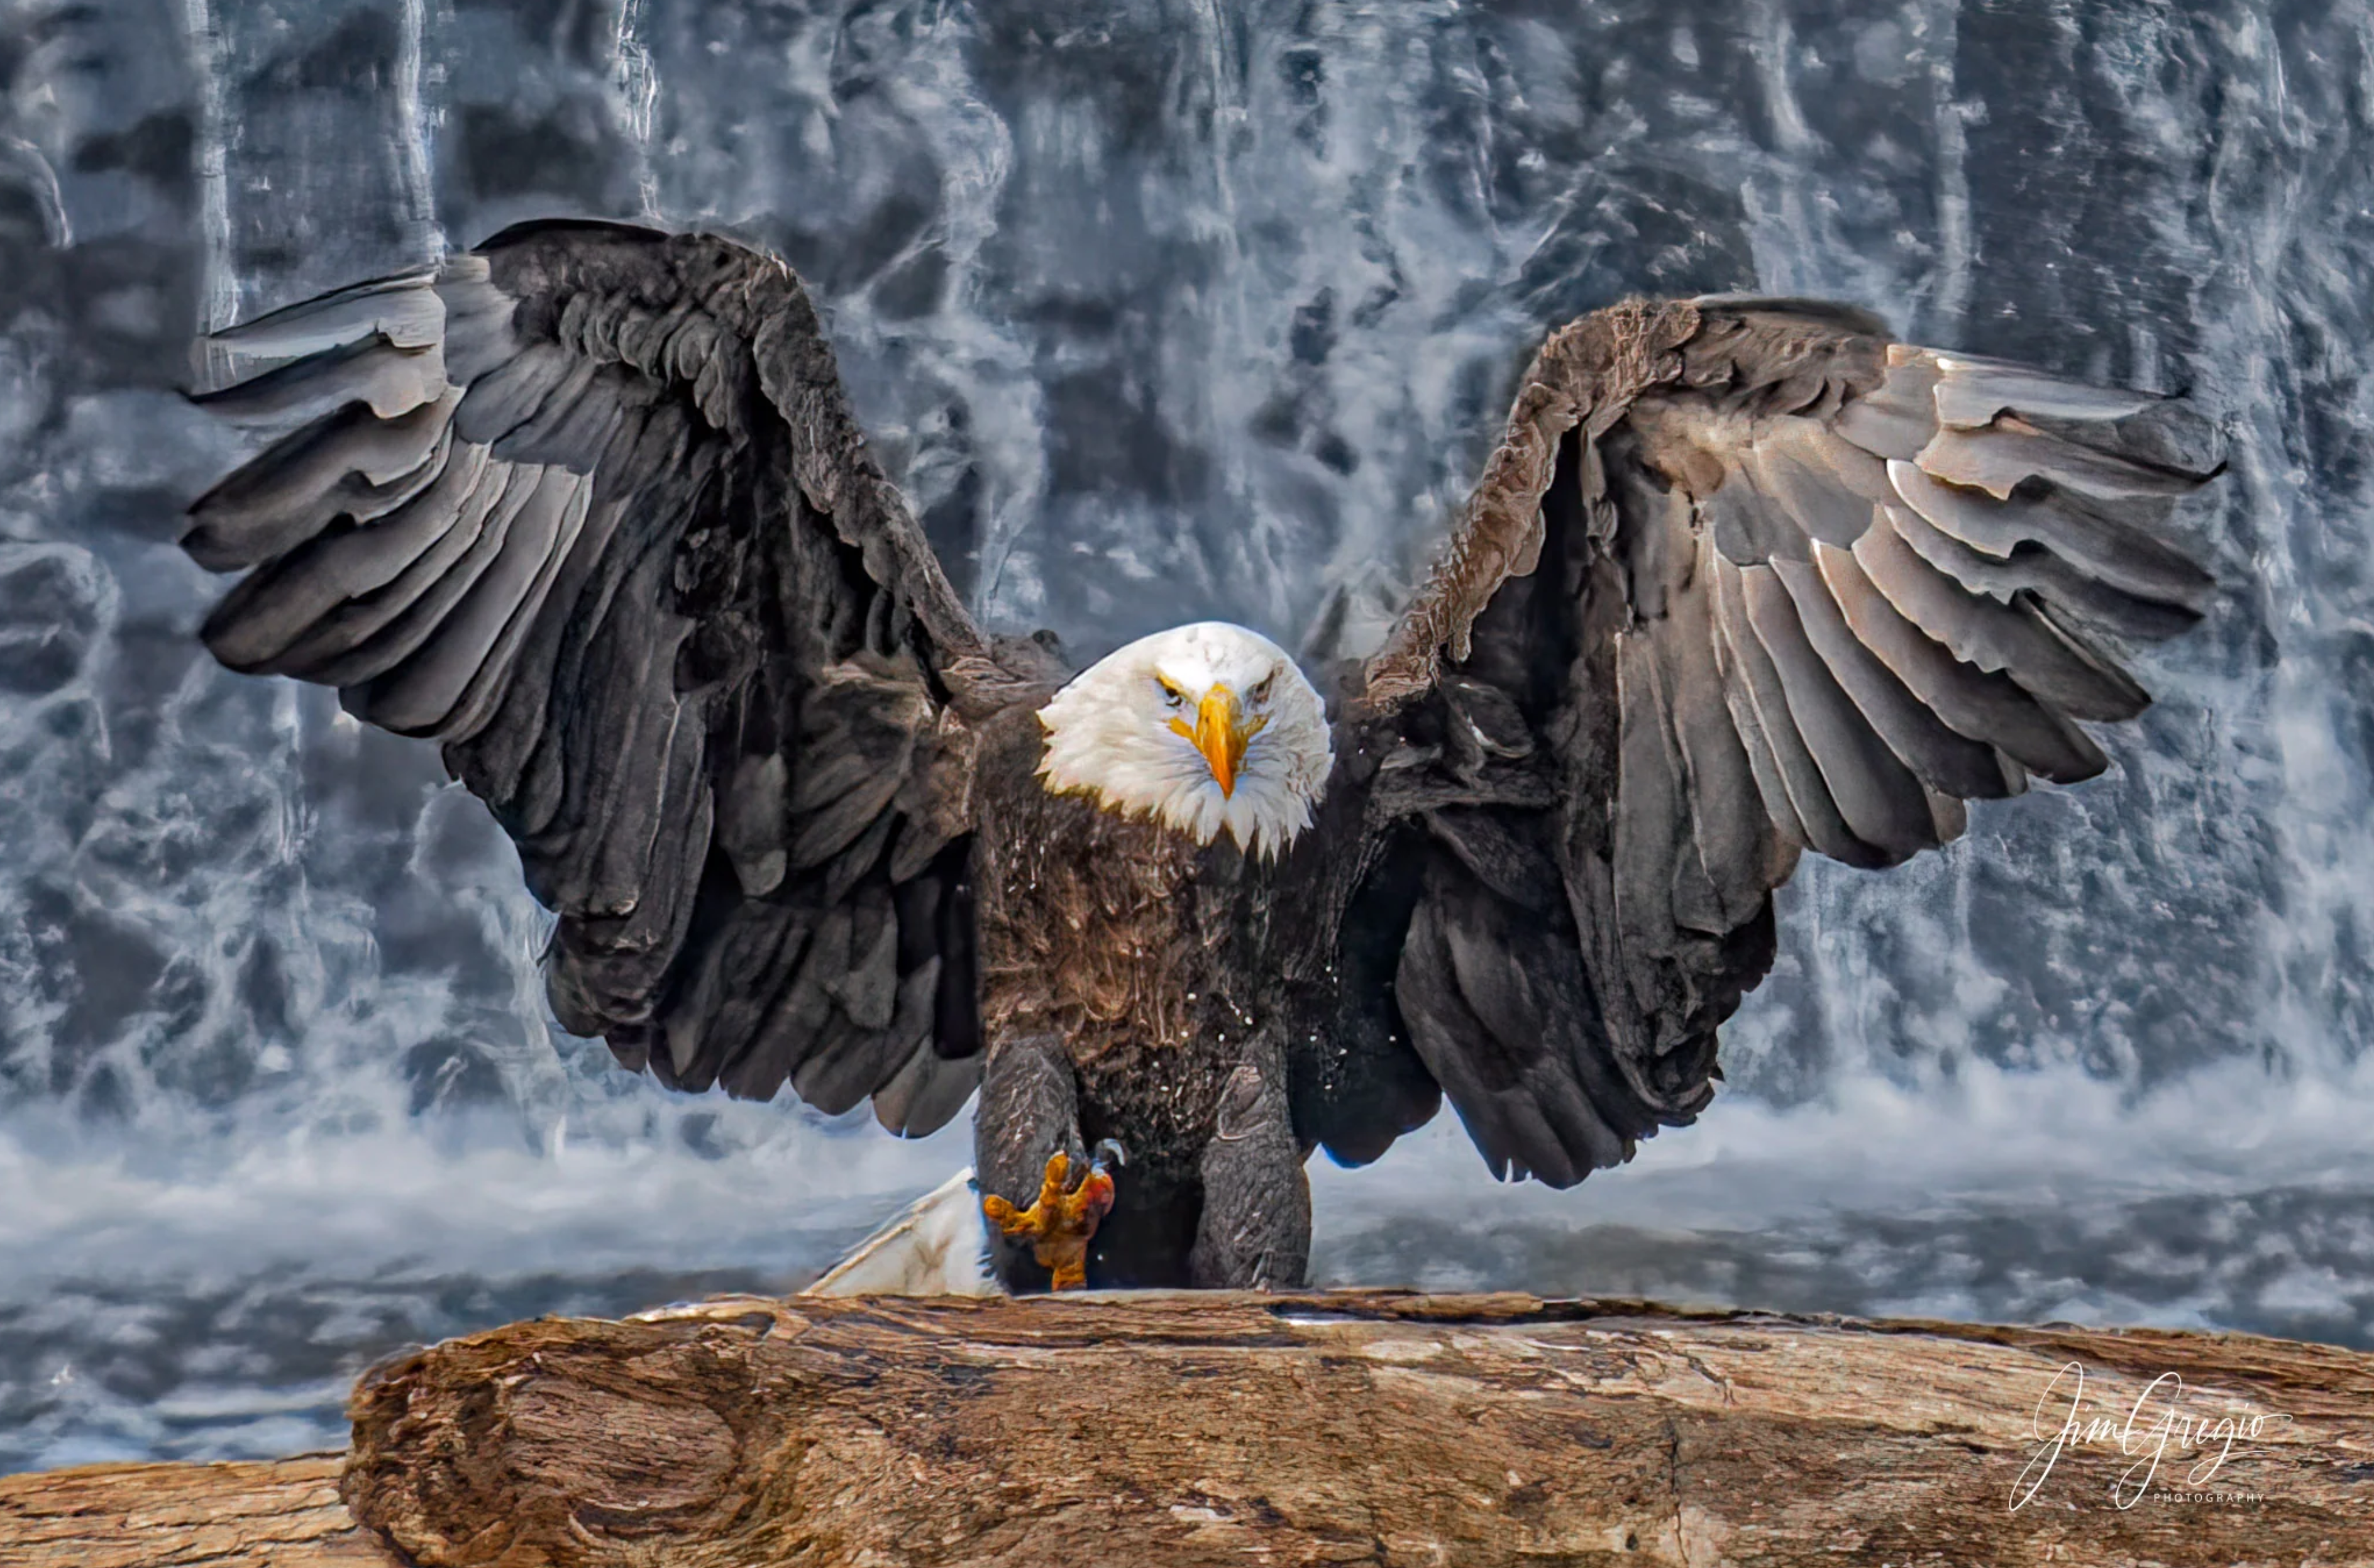 Adrian, the Queen of Big Rock Park in New Brighton PA.  A gorgeous bald eagle lifts her right leg and spreads her wings on a log in front of a waterfall.